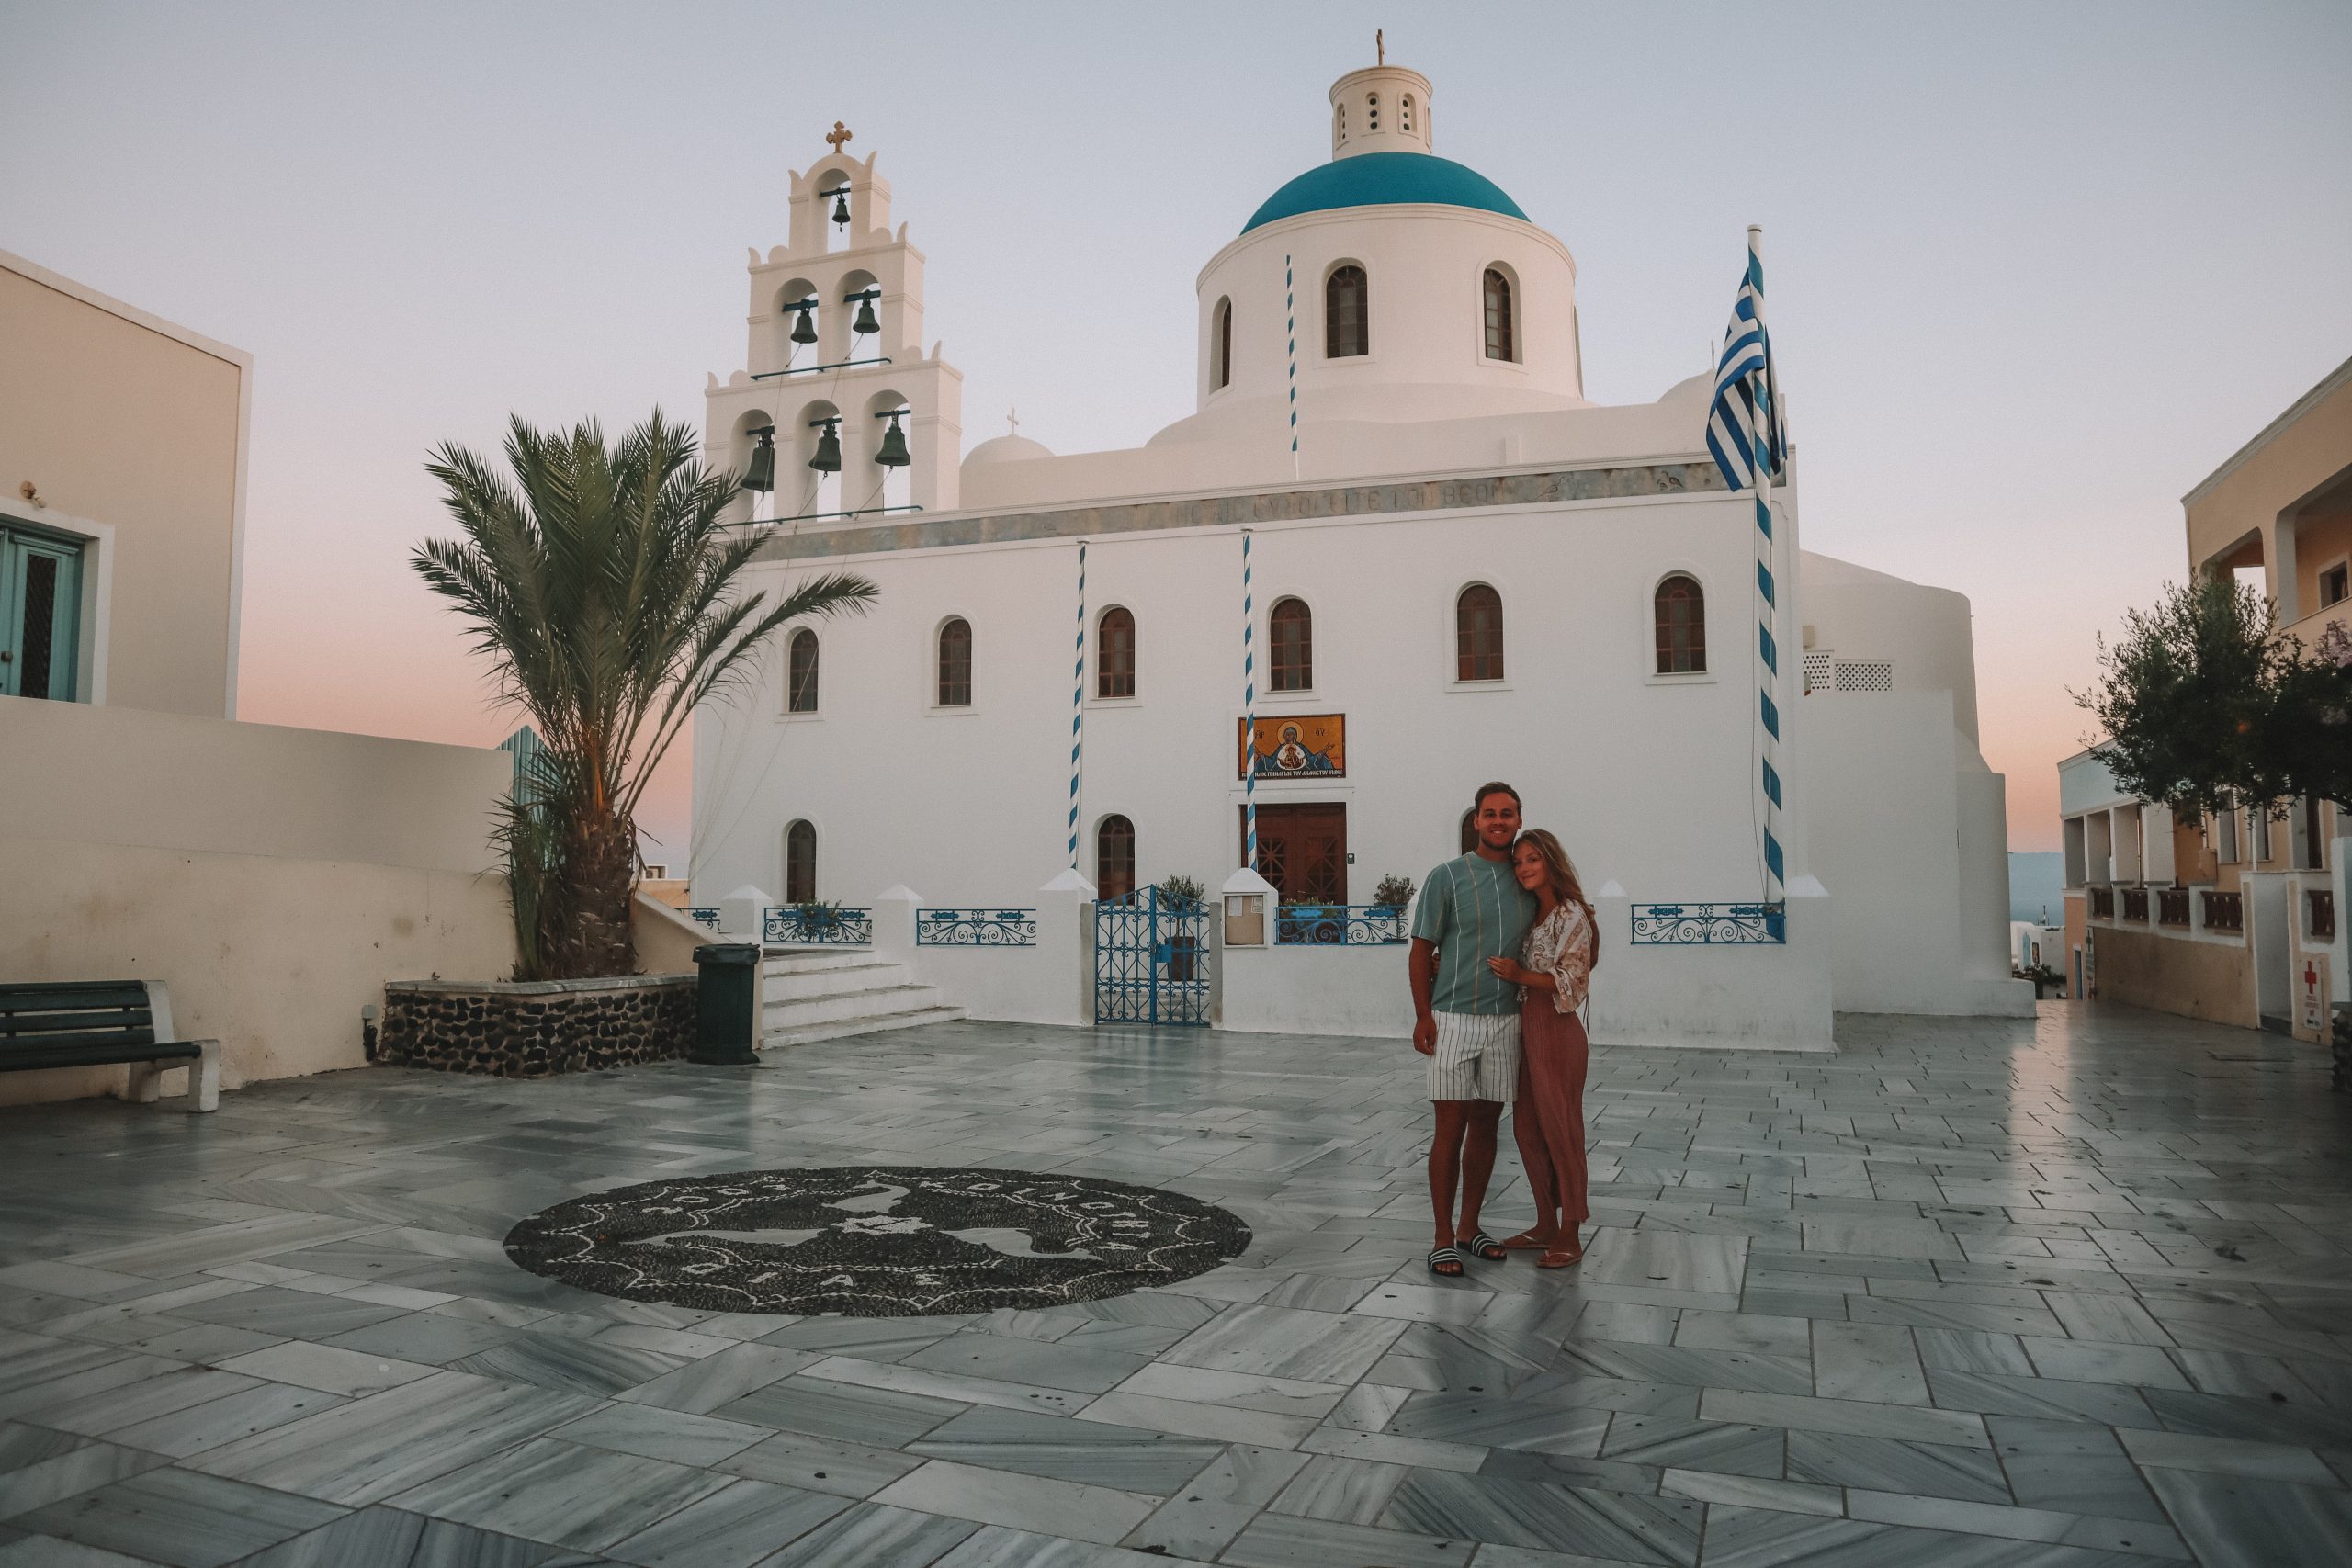 A couple stood in front of a blue domed building and bells during sunrise. Things to do in Santorini